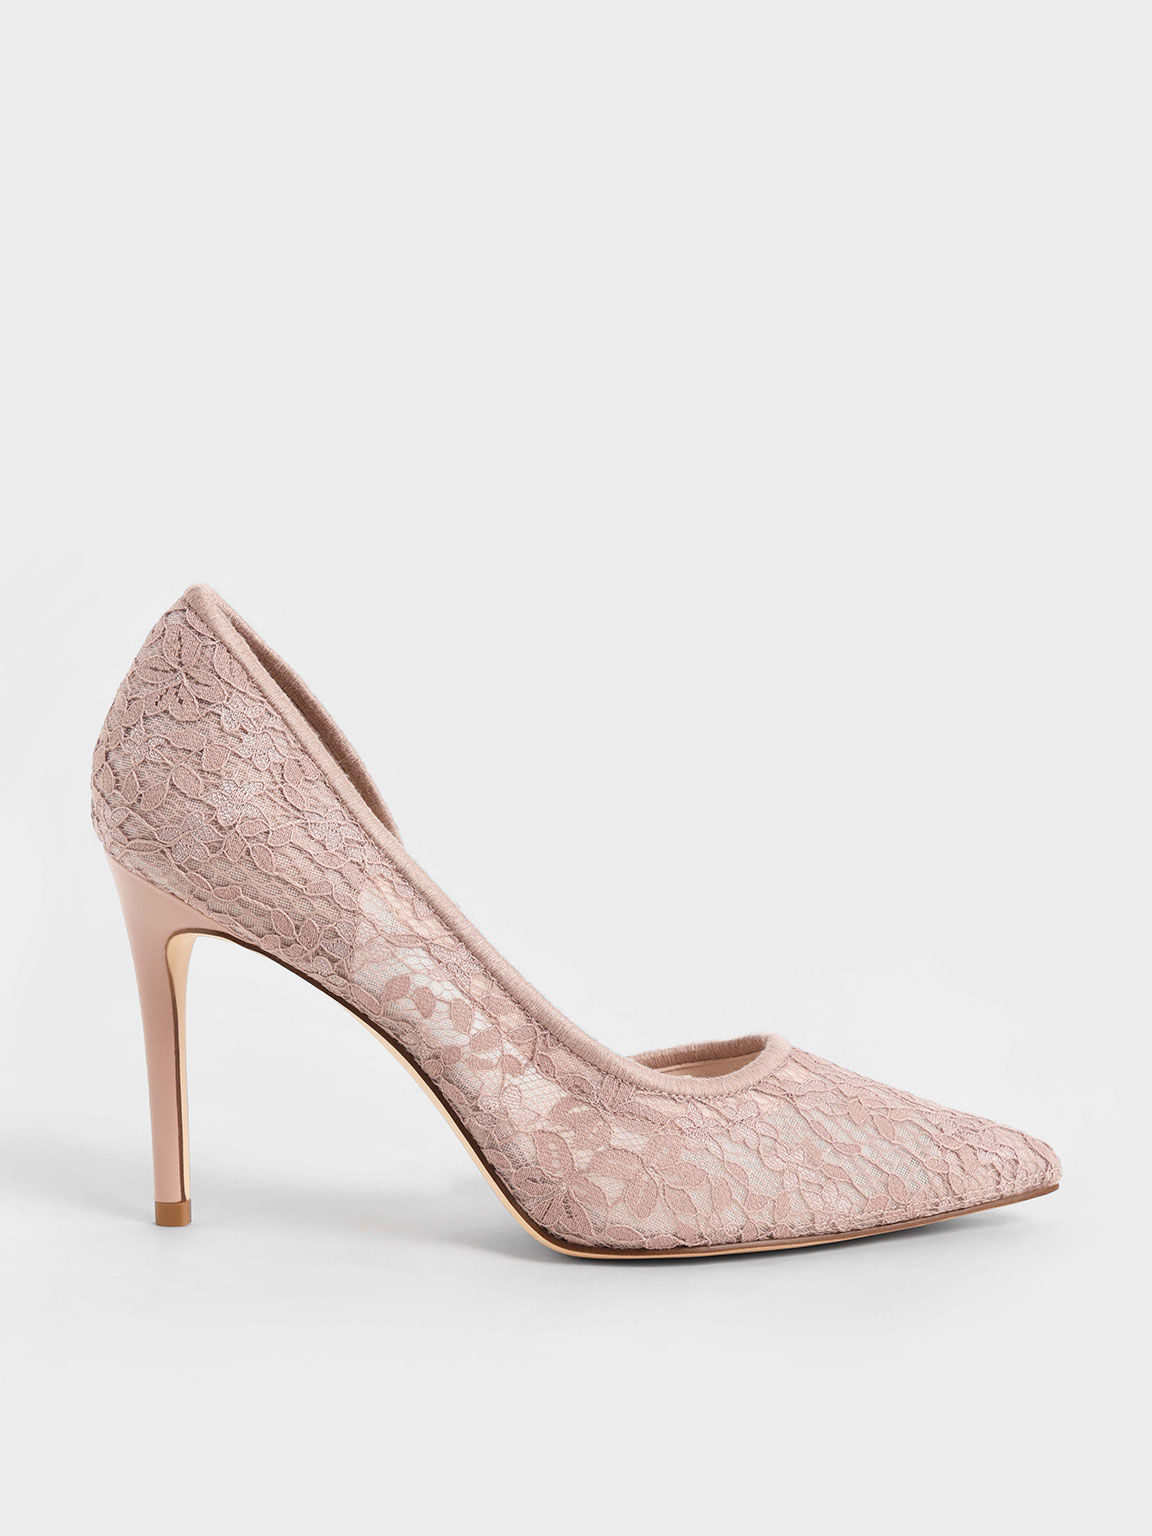 Pink Lace & Mesh Half D'Orsay Stiletto Pumps - CHARLES & KEITH HK